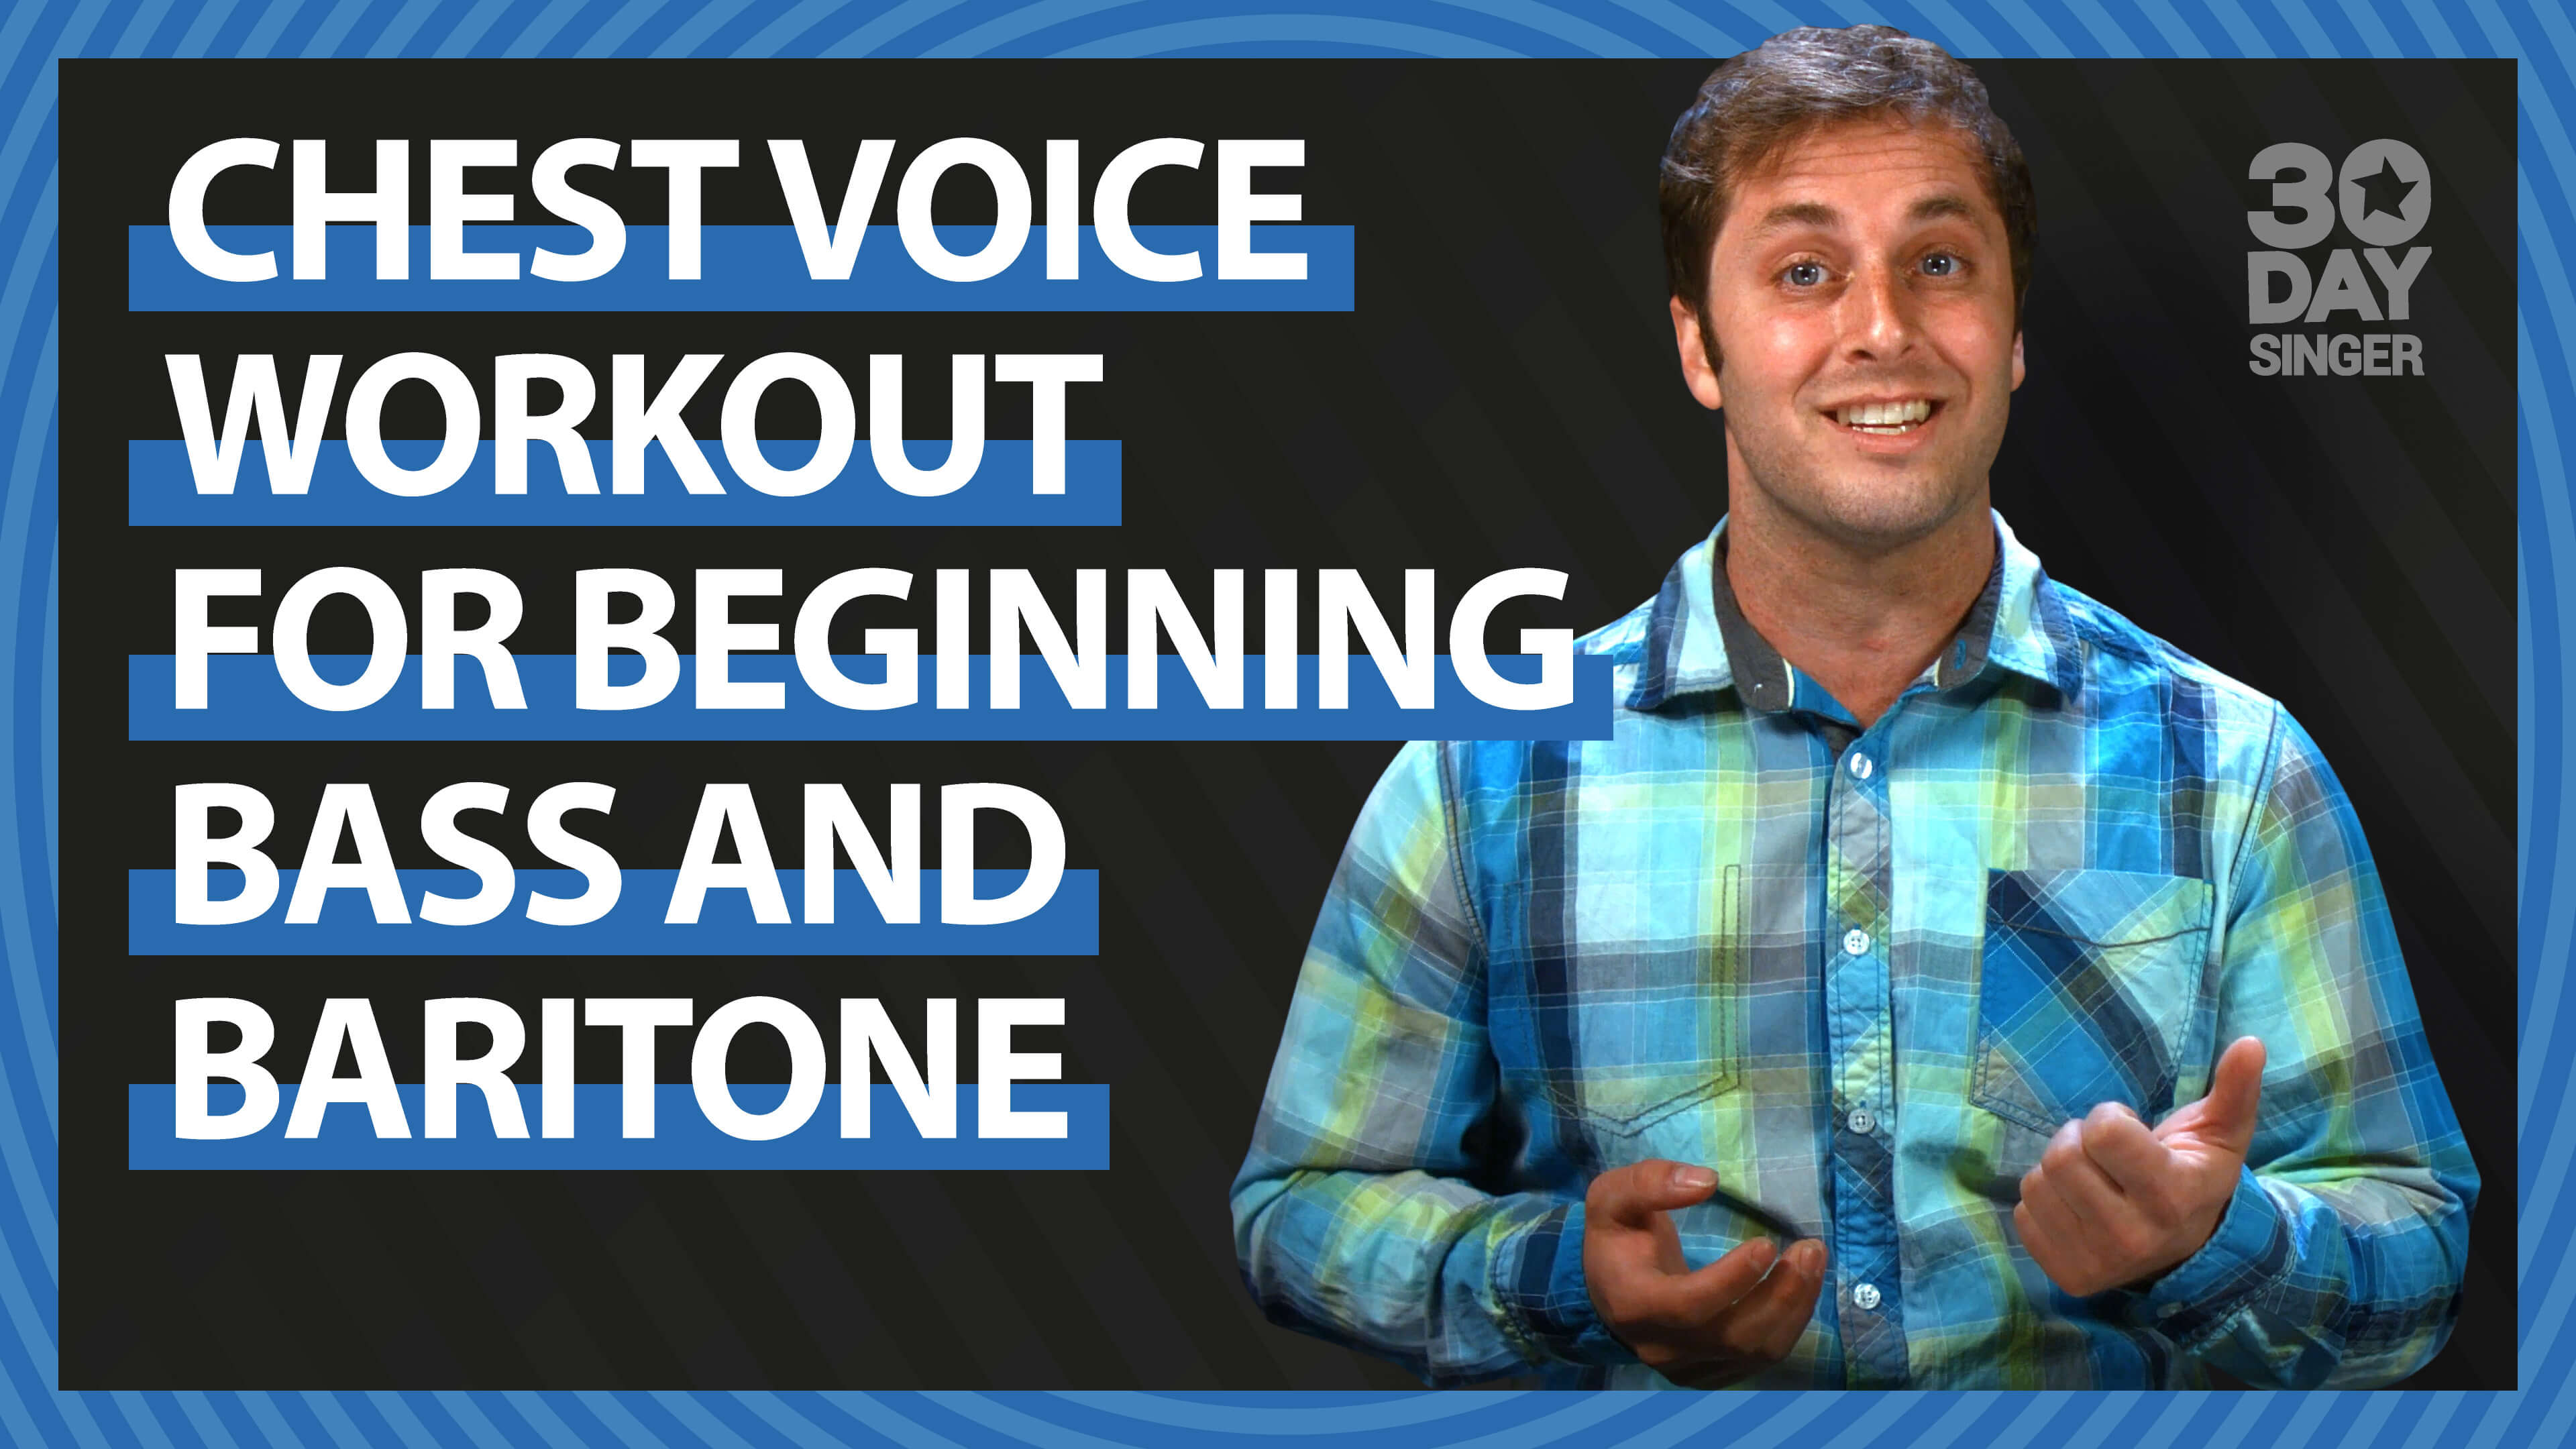 Daily Chest Voice Workout For Beginning Bass And Low Baritone